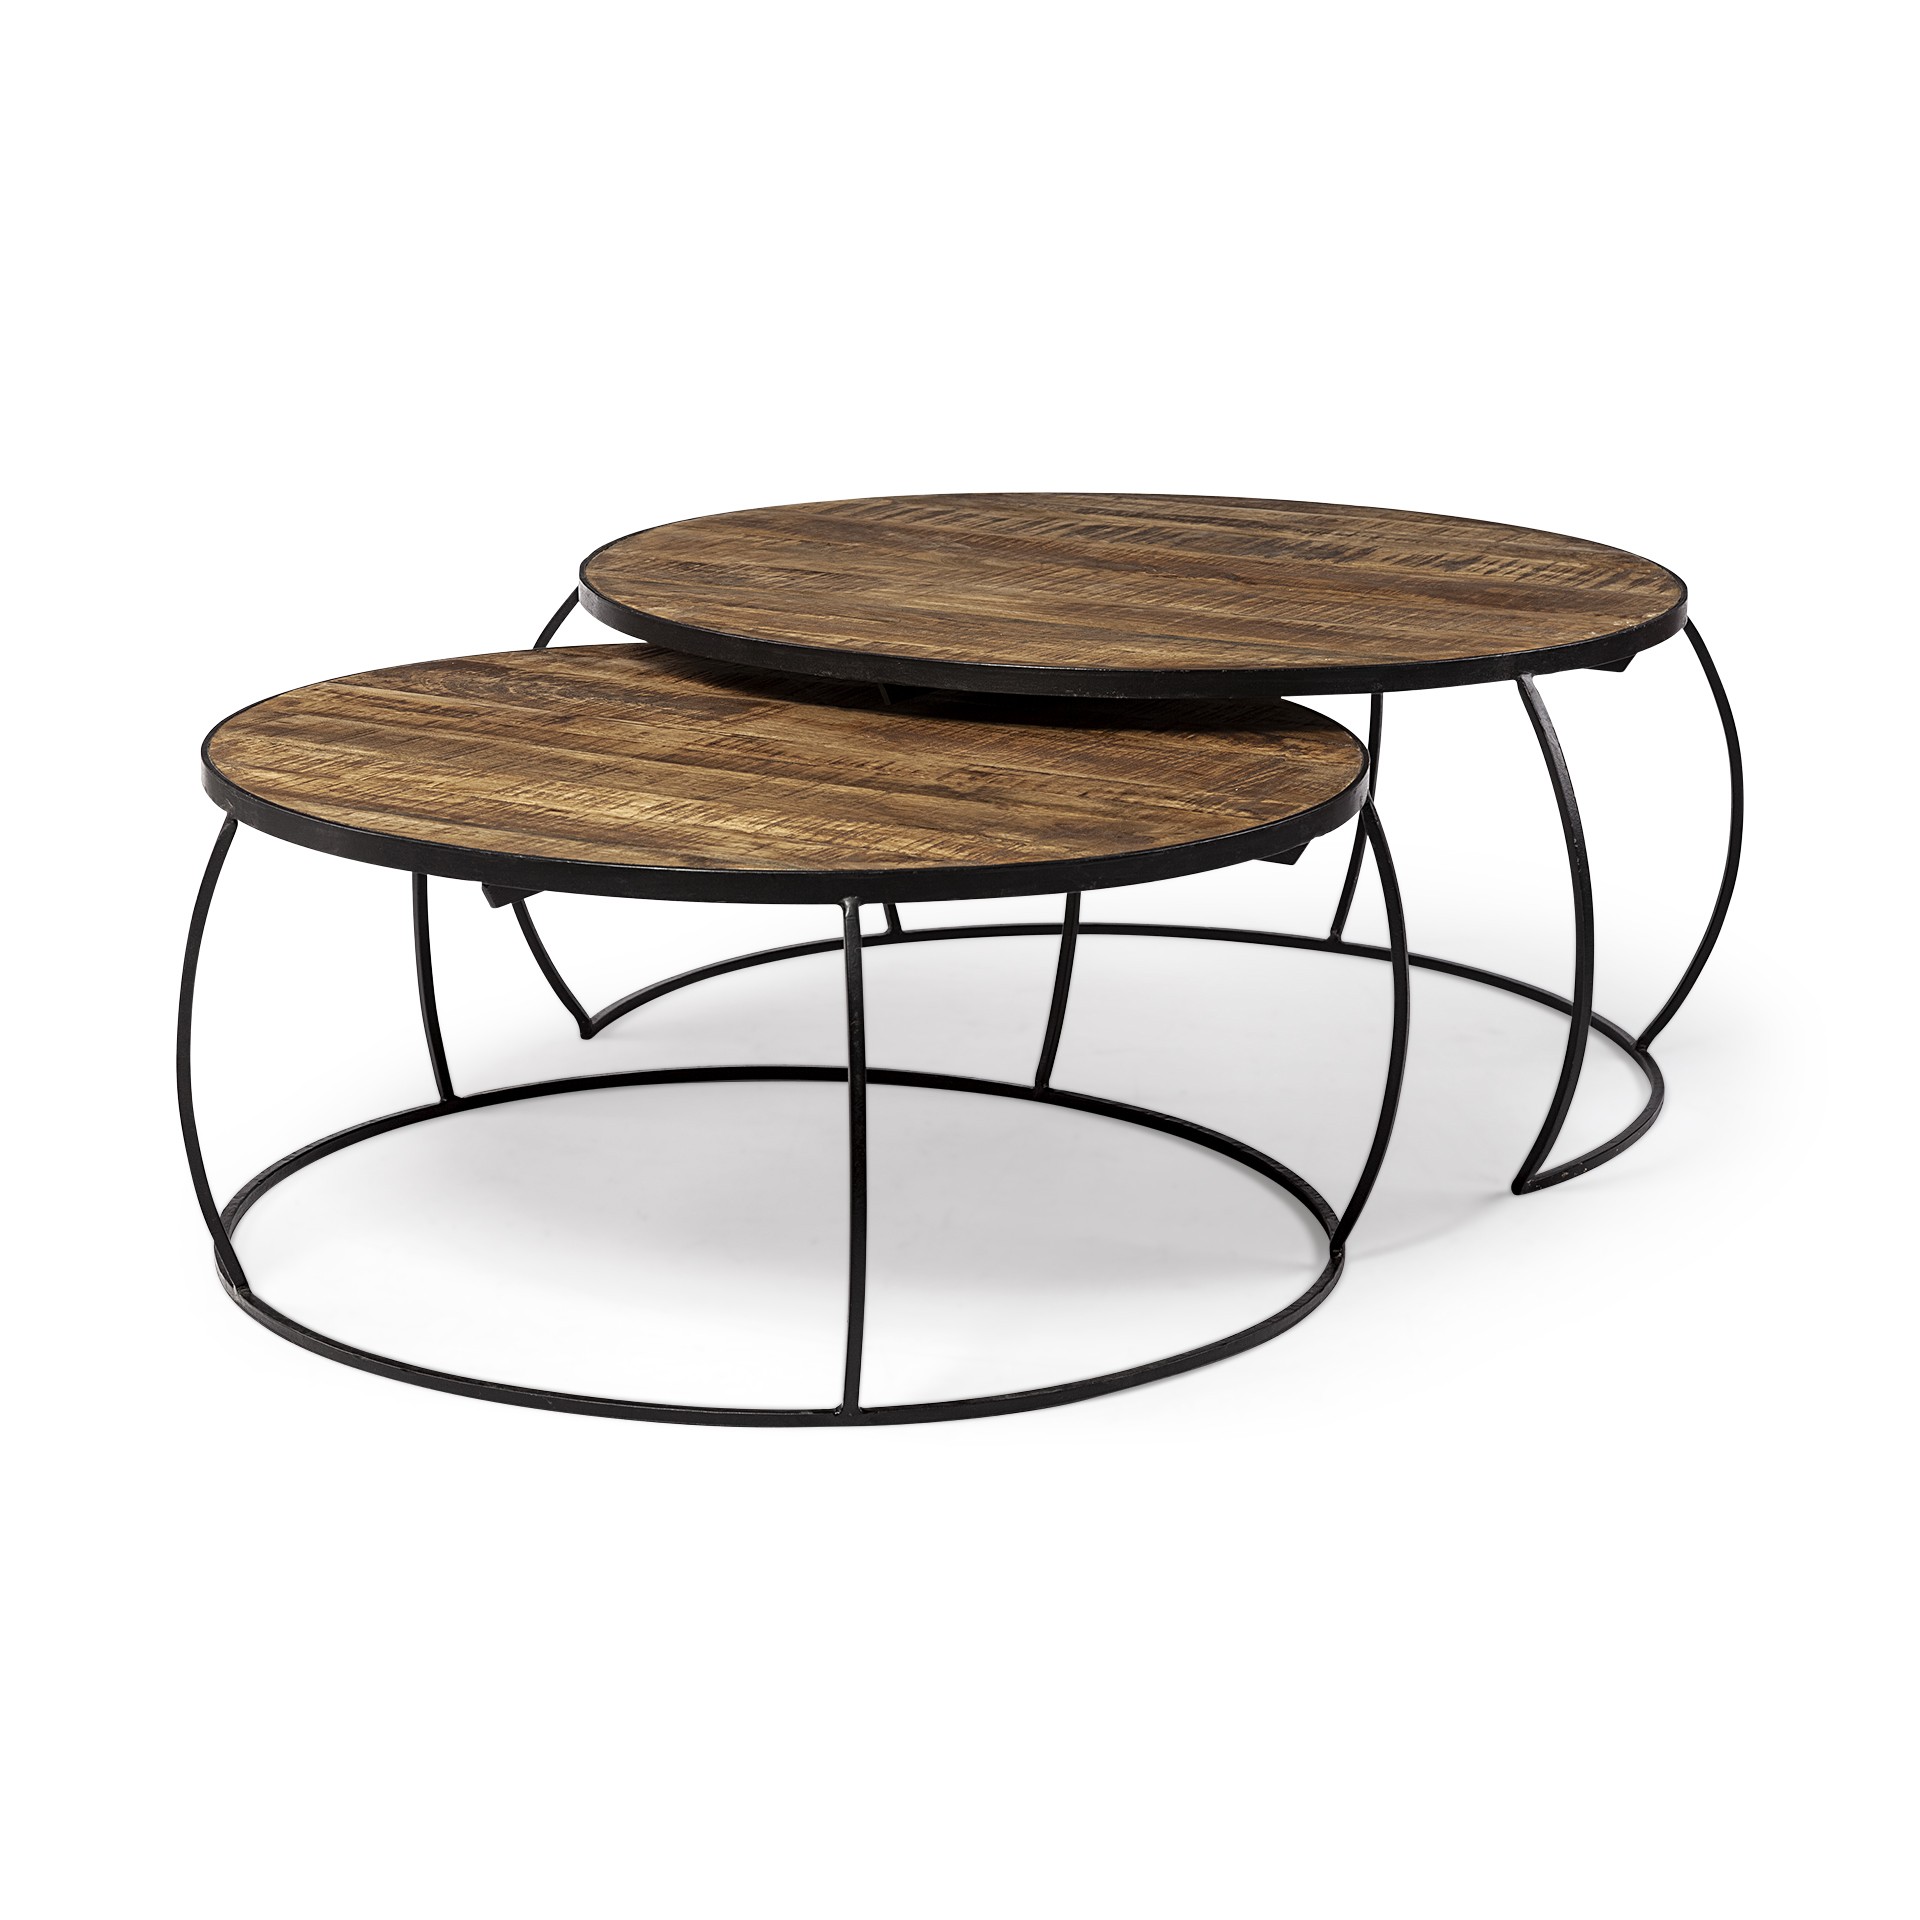 S/2 41" & 38" Round Wood Top Nesting Coffee Tables